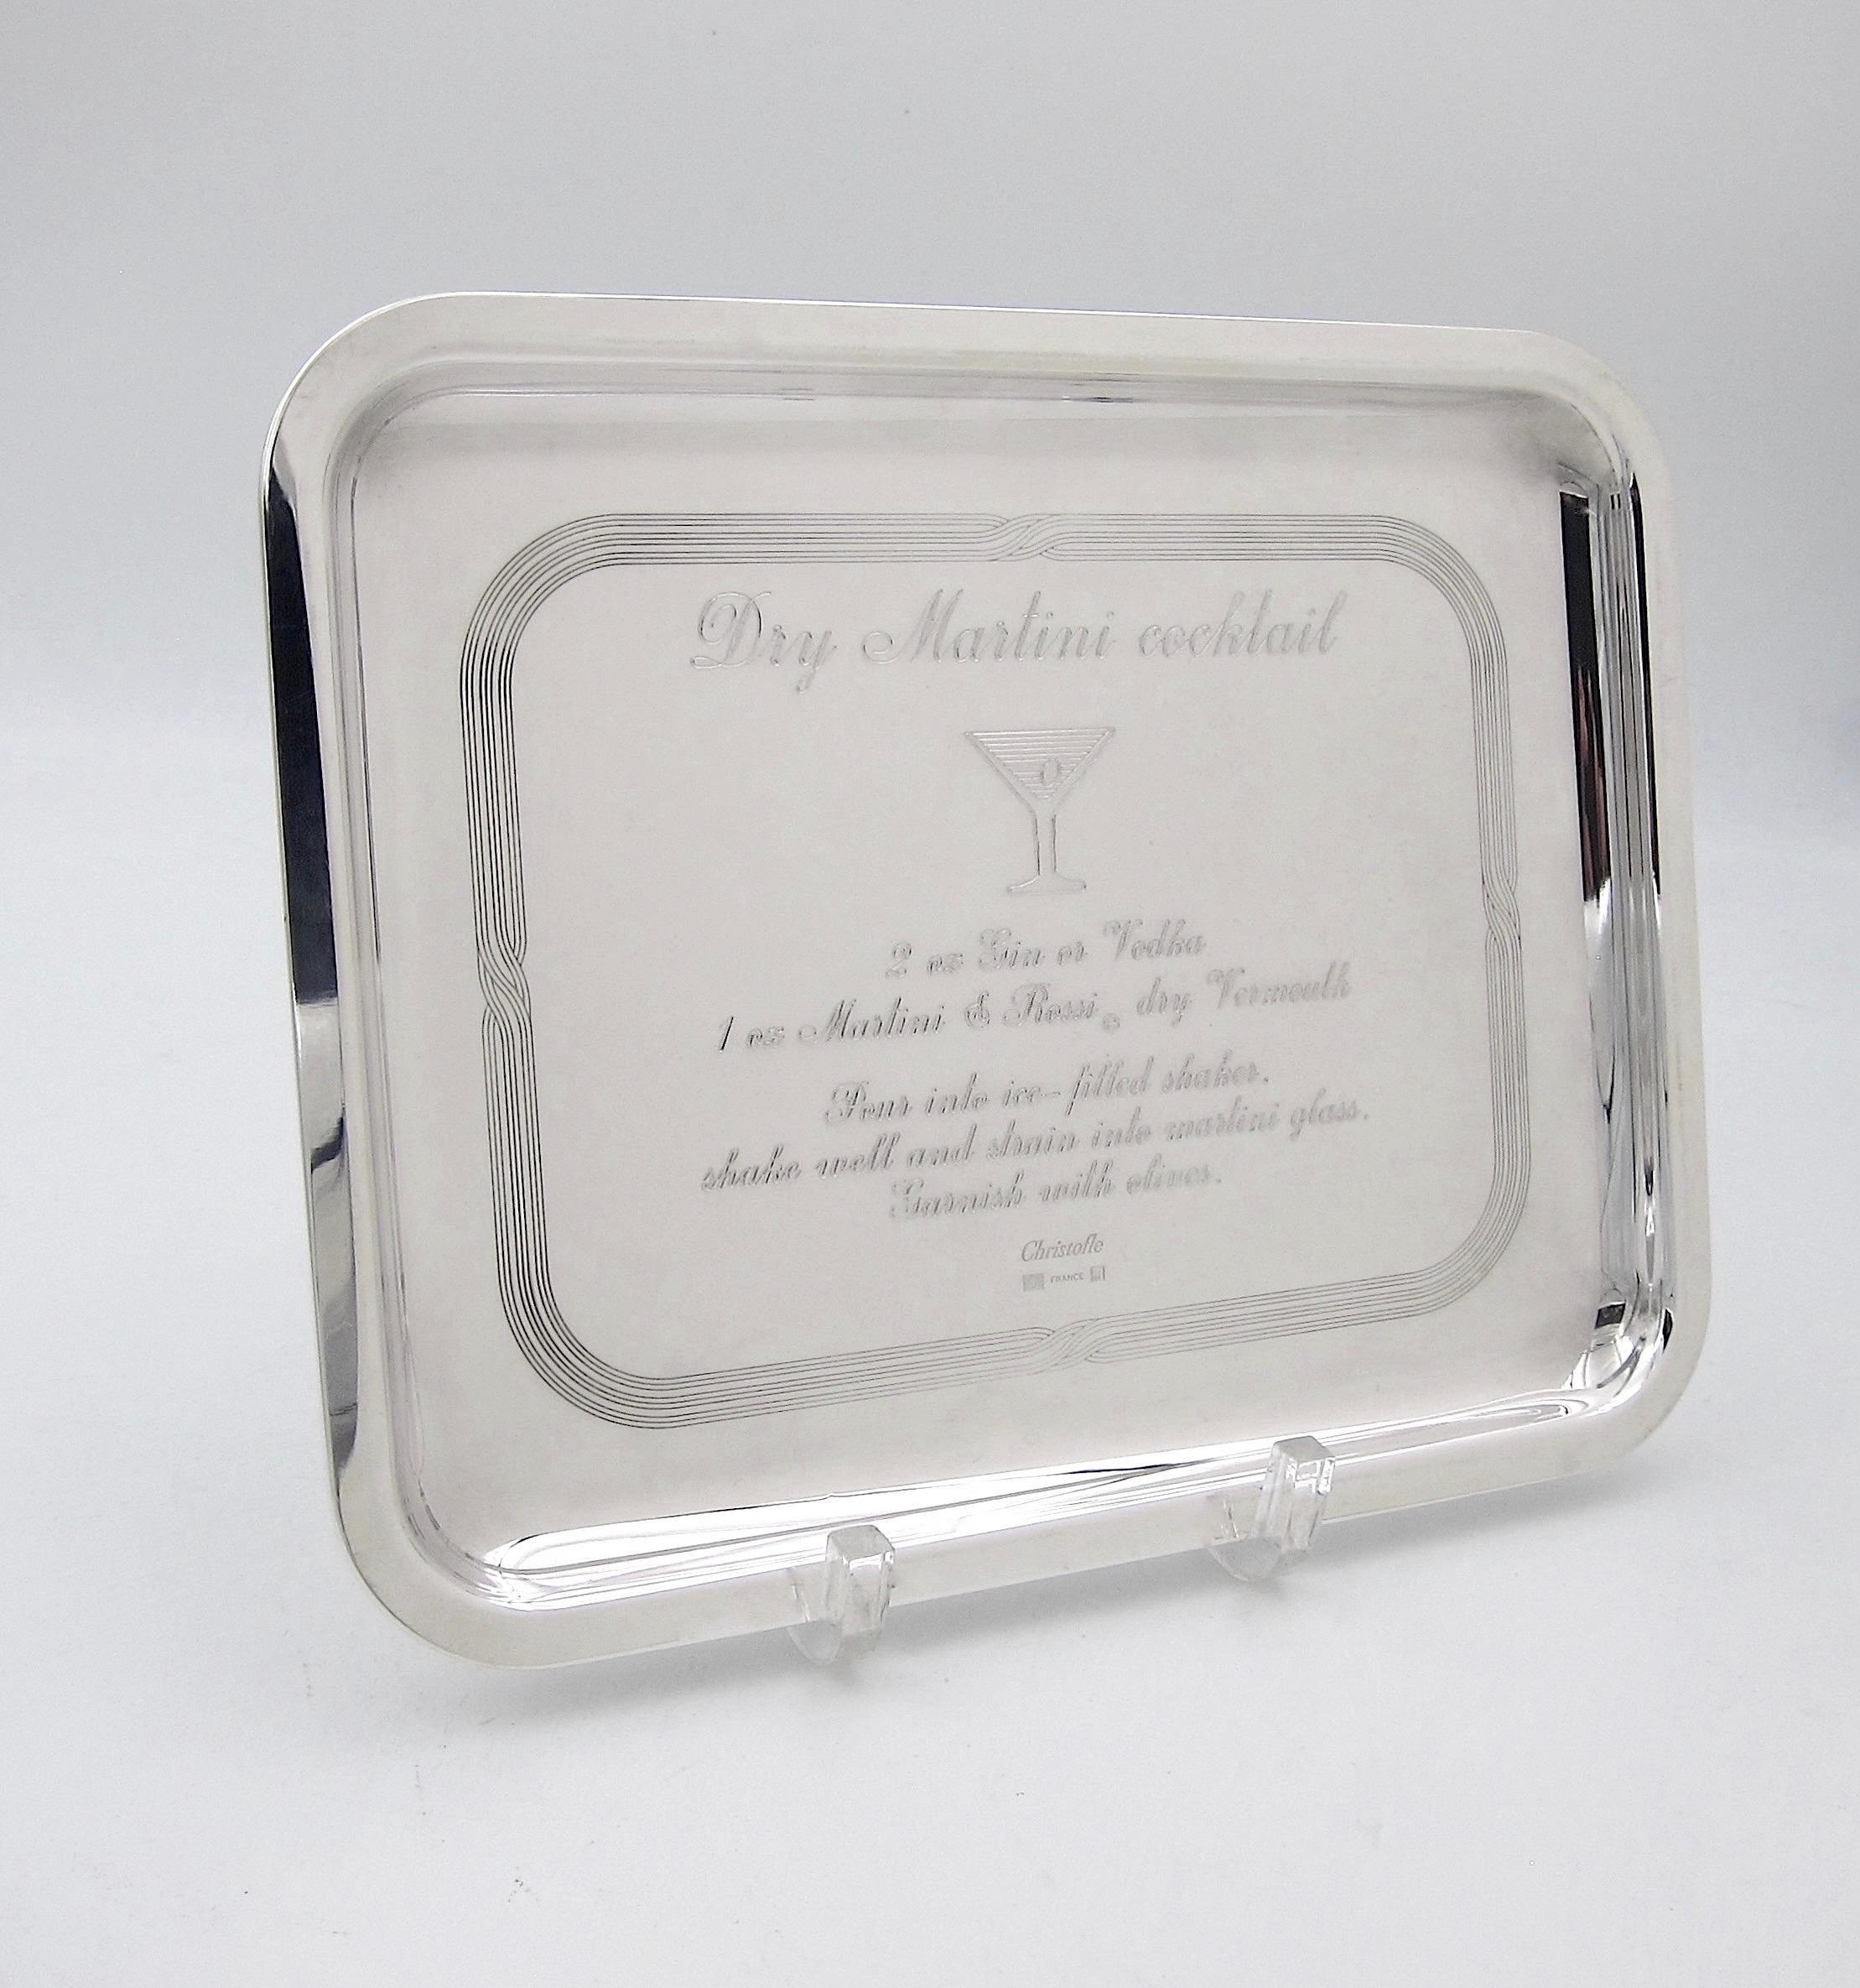 A Christofle of Paris drinks tray in silver plate, decorated with an engraved recipe for a dry martini cocktail. The sleek and elegant rectangular bar tray remains in good condition with a few scuffs and scratches, particularly on the base. Fully